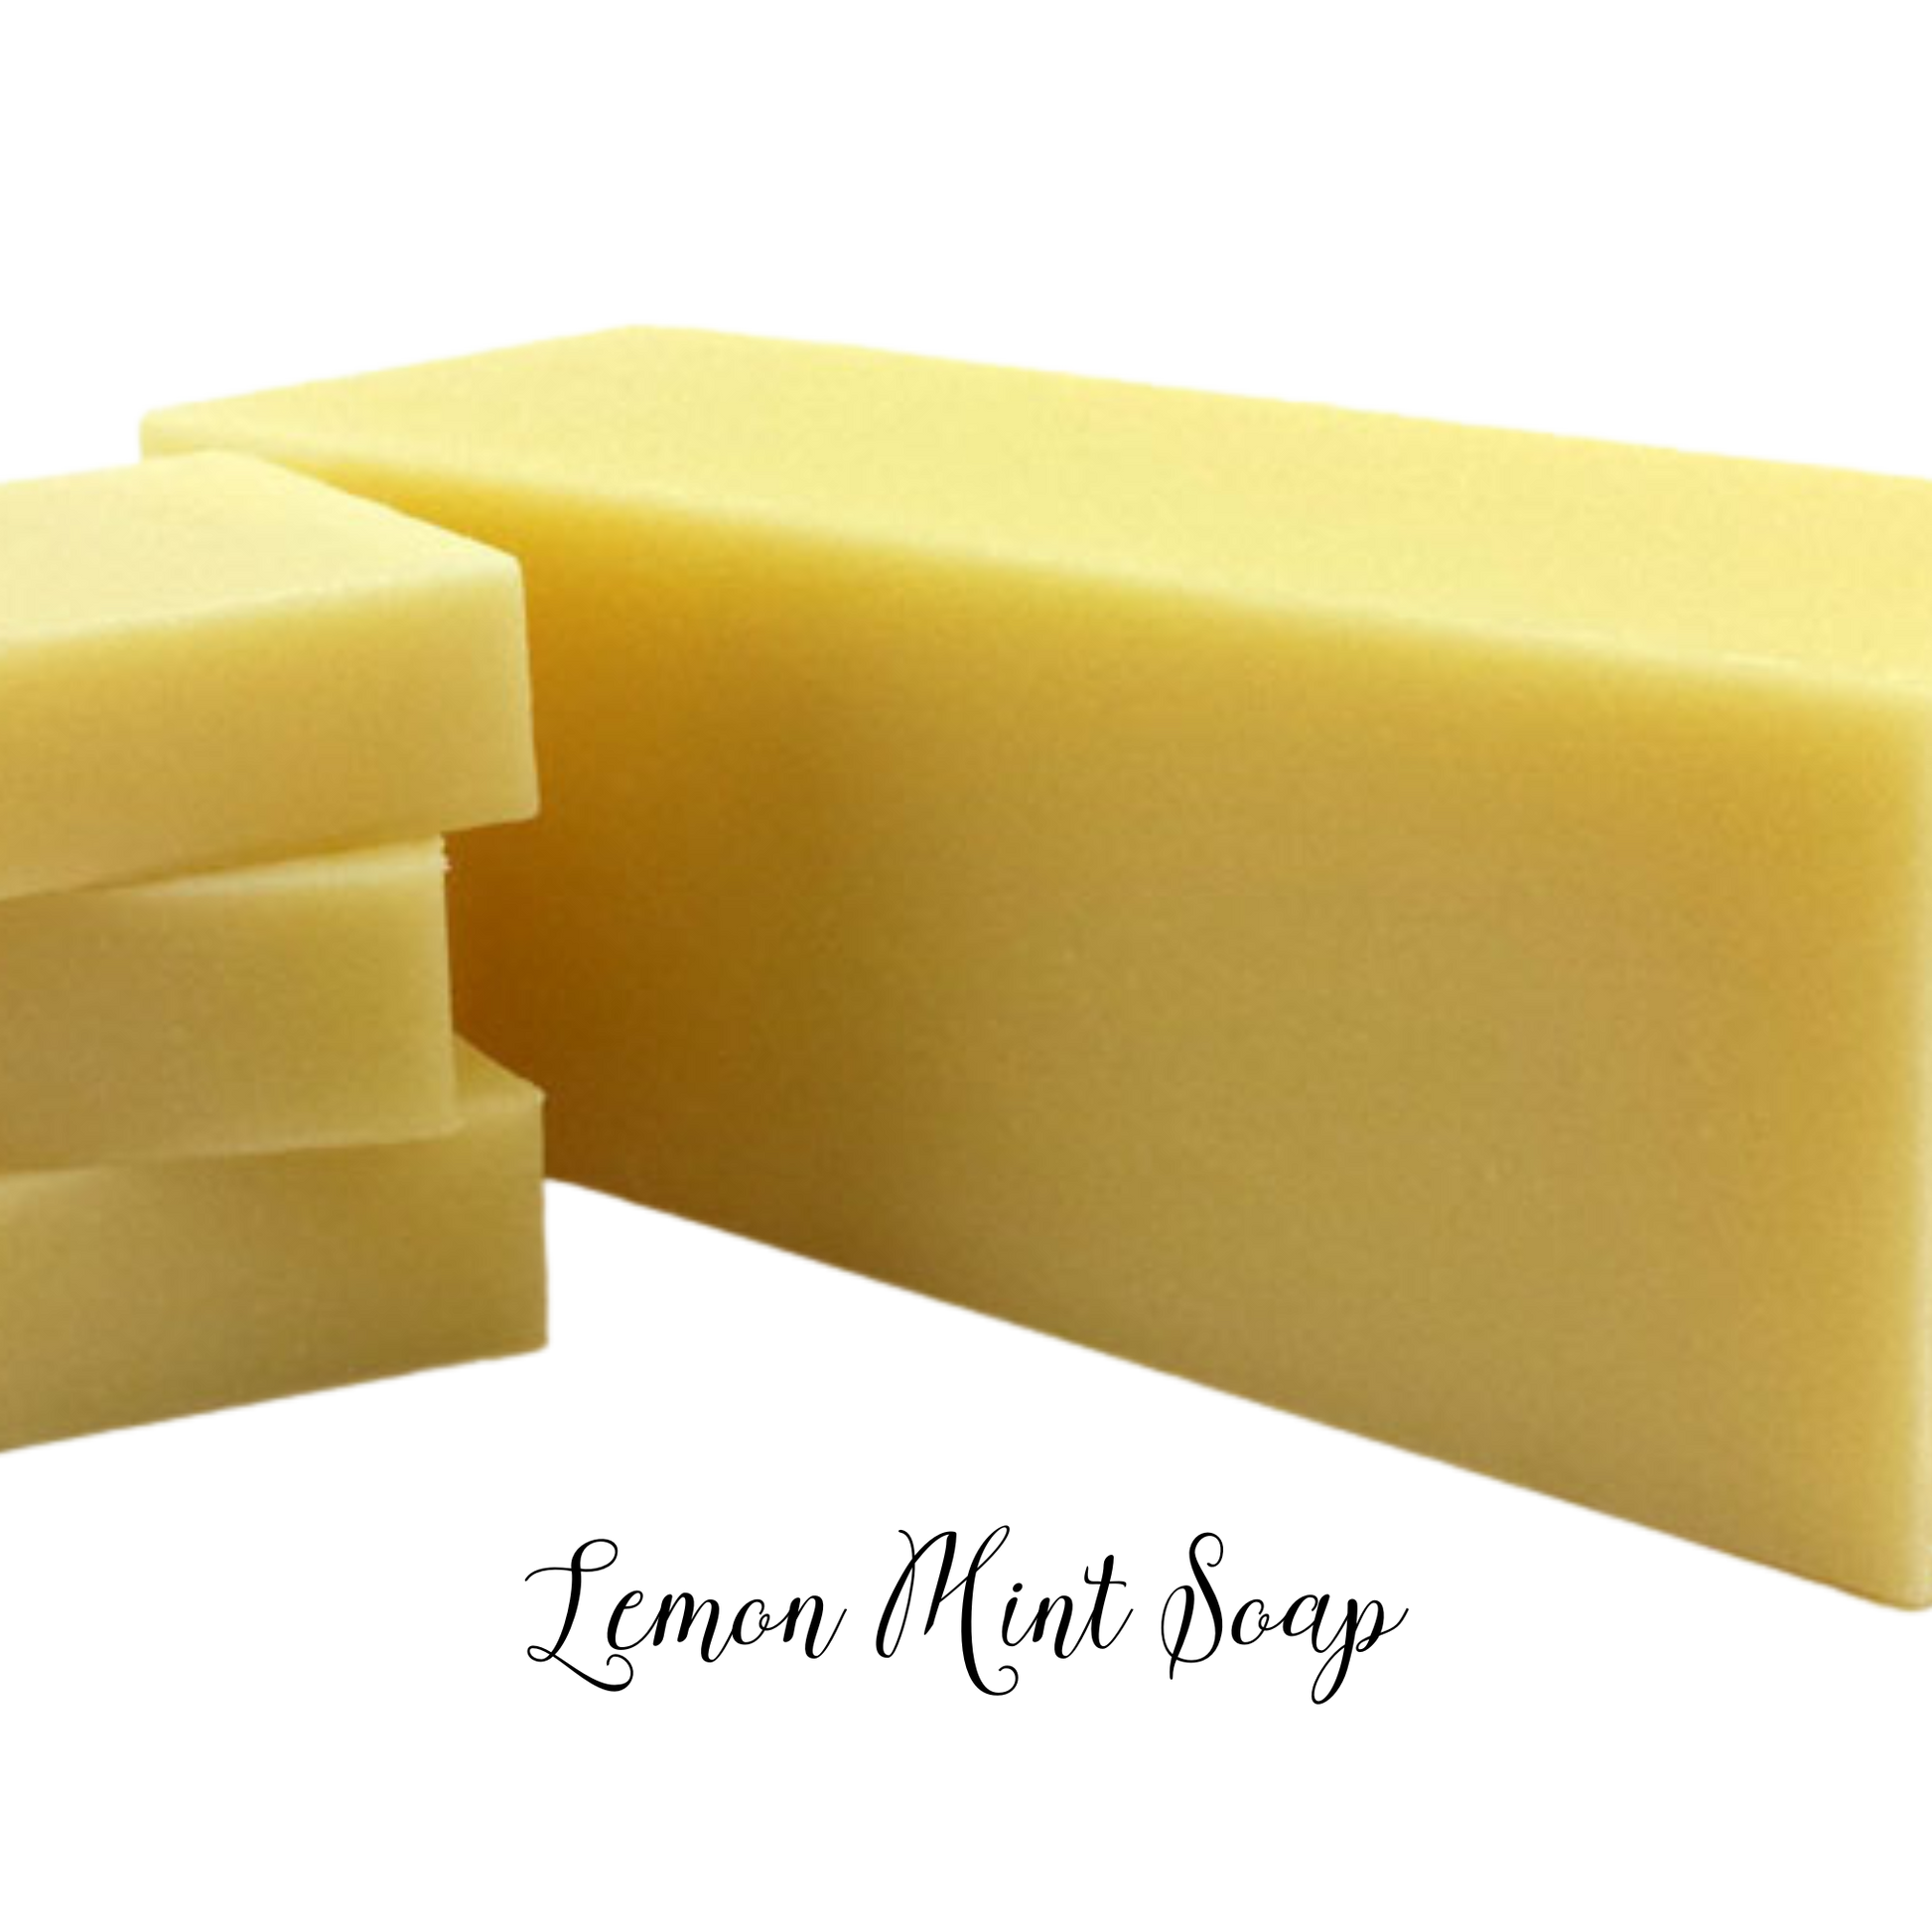 sweet lemon and sweet peppermint oil blended to perfection!   4.5 oz  bar soap